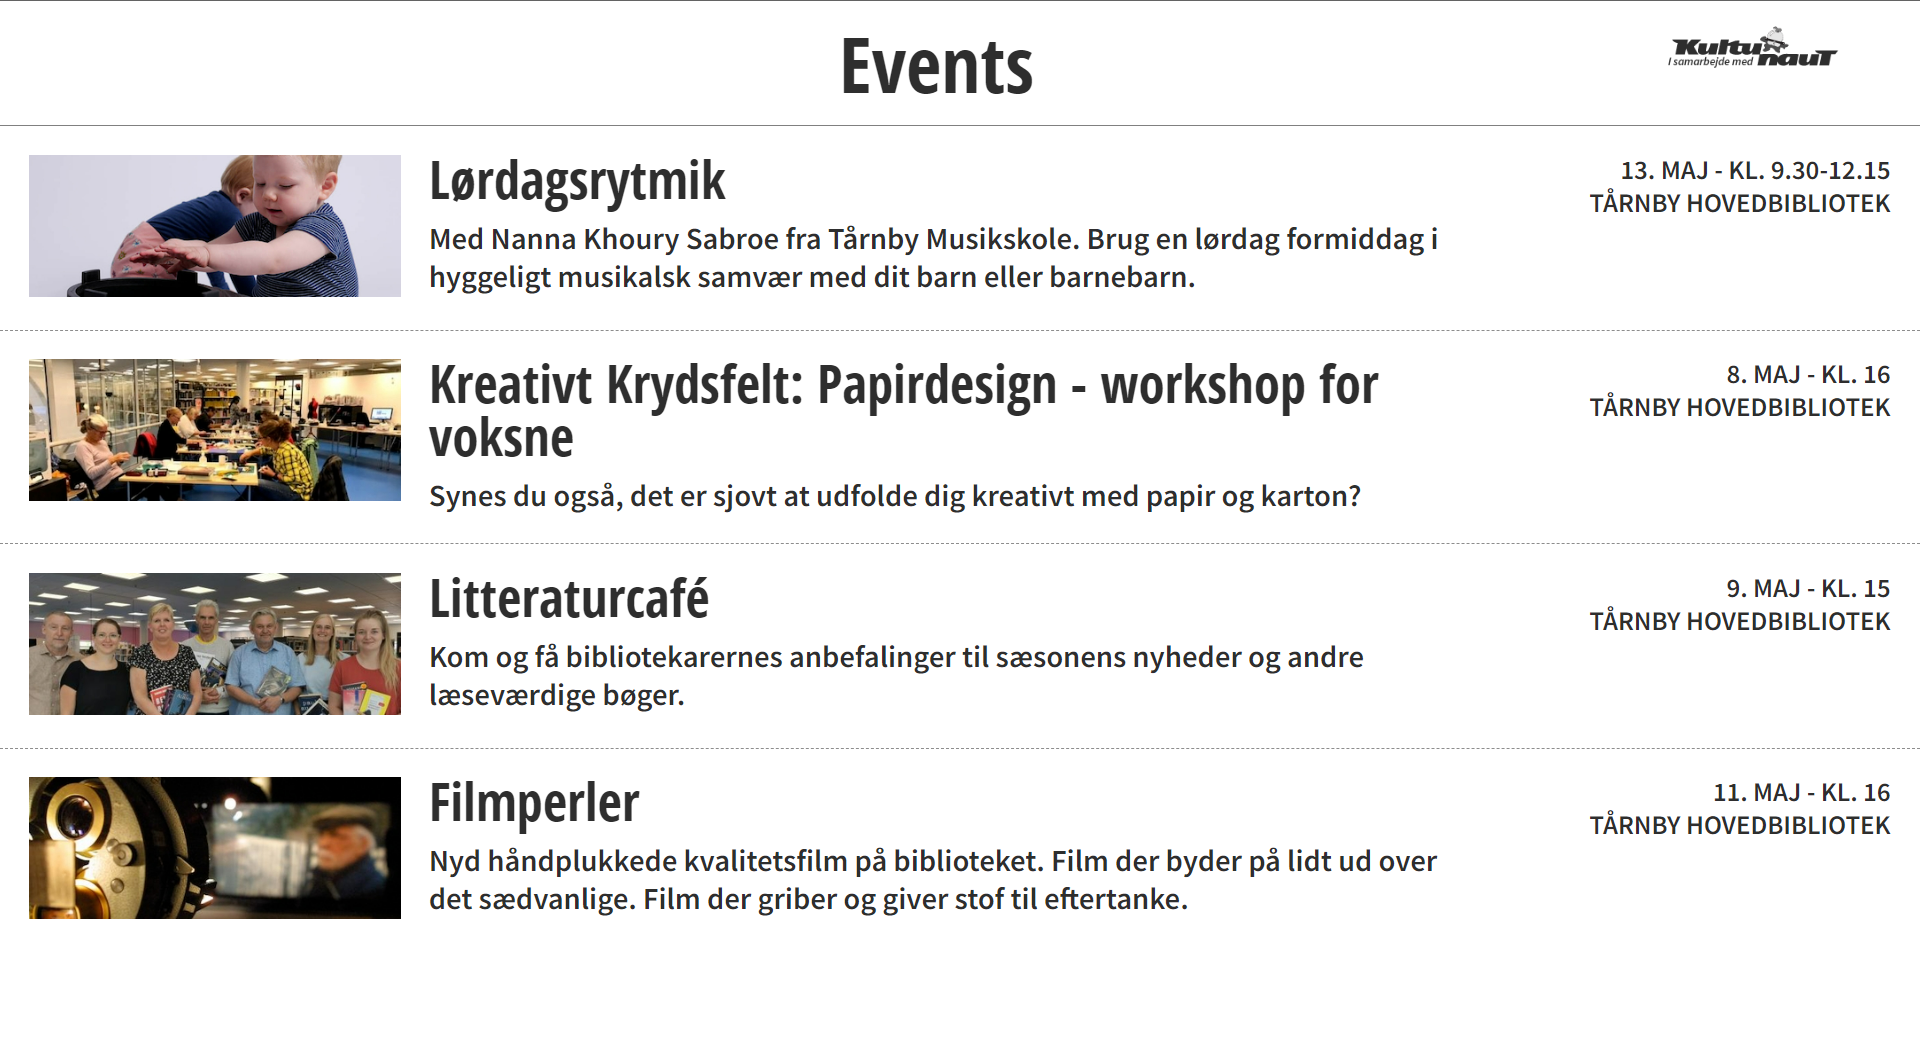 Webpage section listing upcoming events such as a children's music event, a creative paper design workshop, a literature café, and a film highlights showcase at Tårnby Main Library with dates and times.